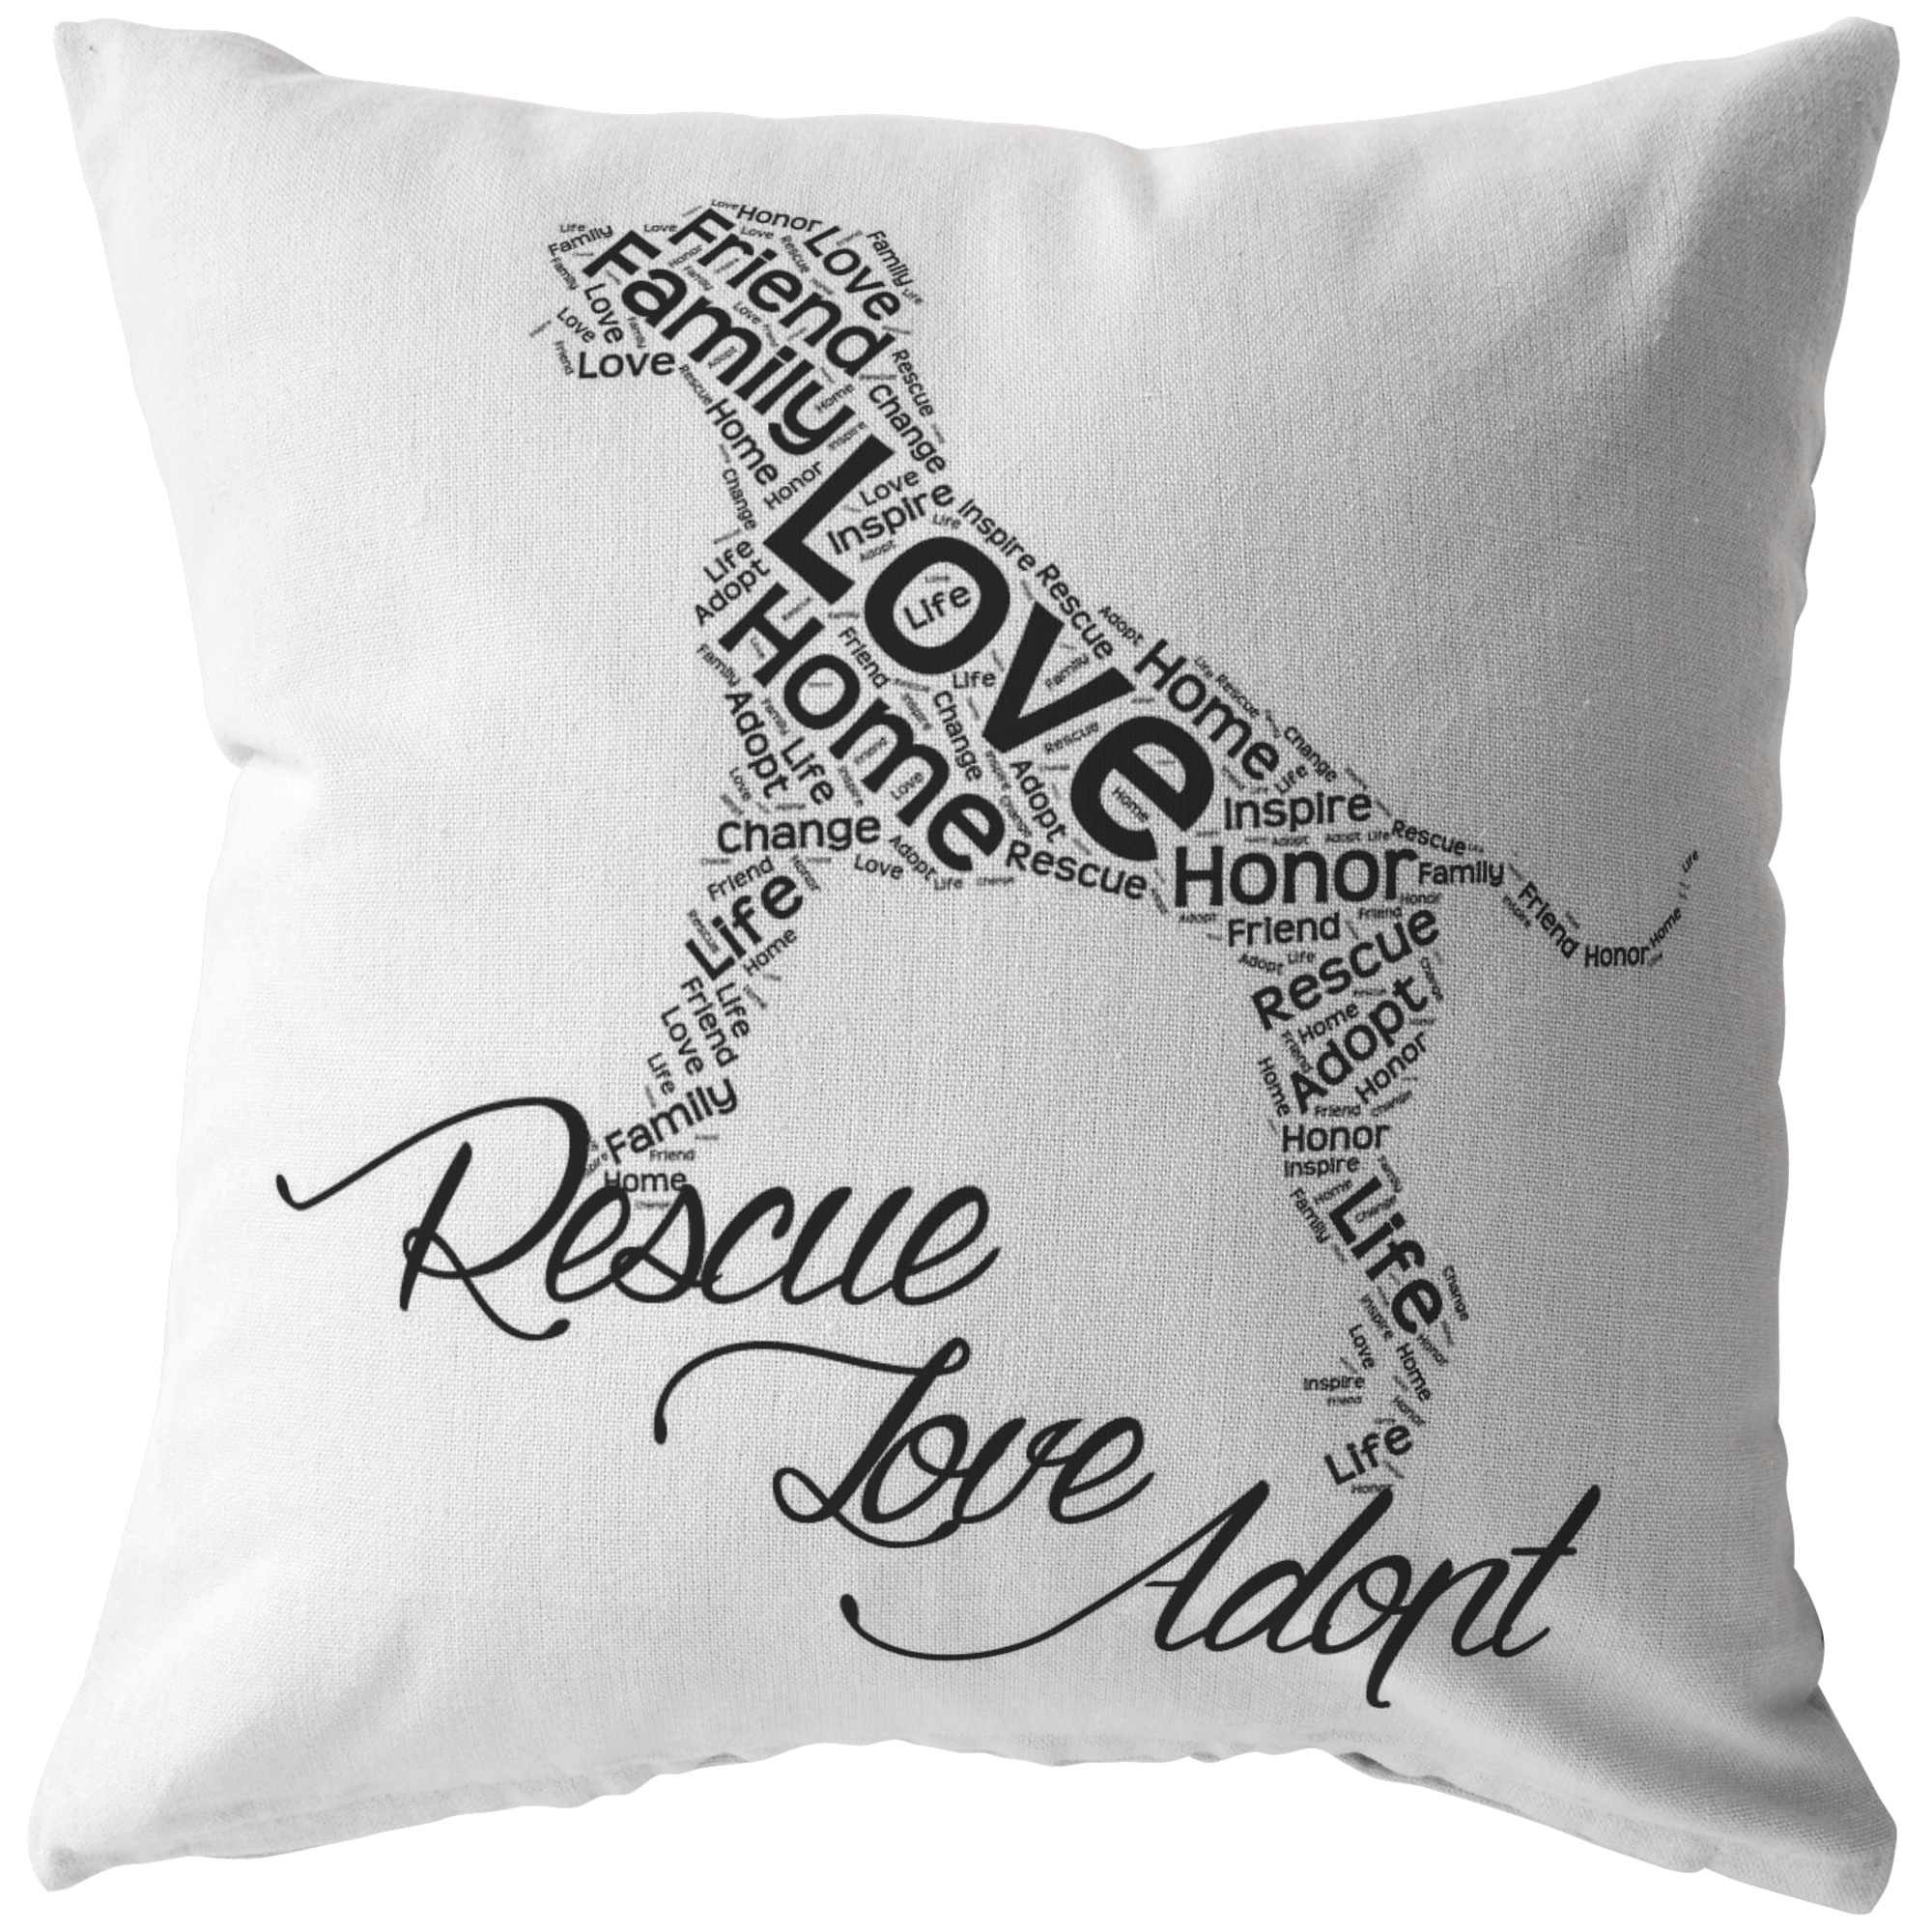 Dog Rescue, Love and Adopt - Pillow